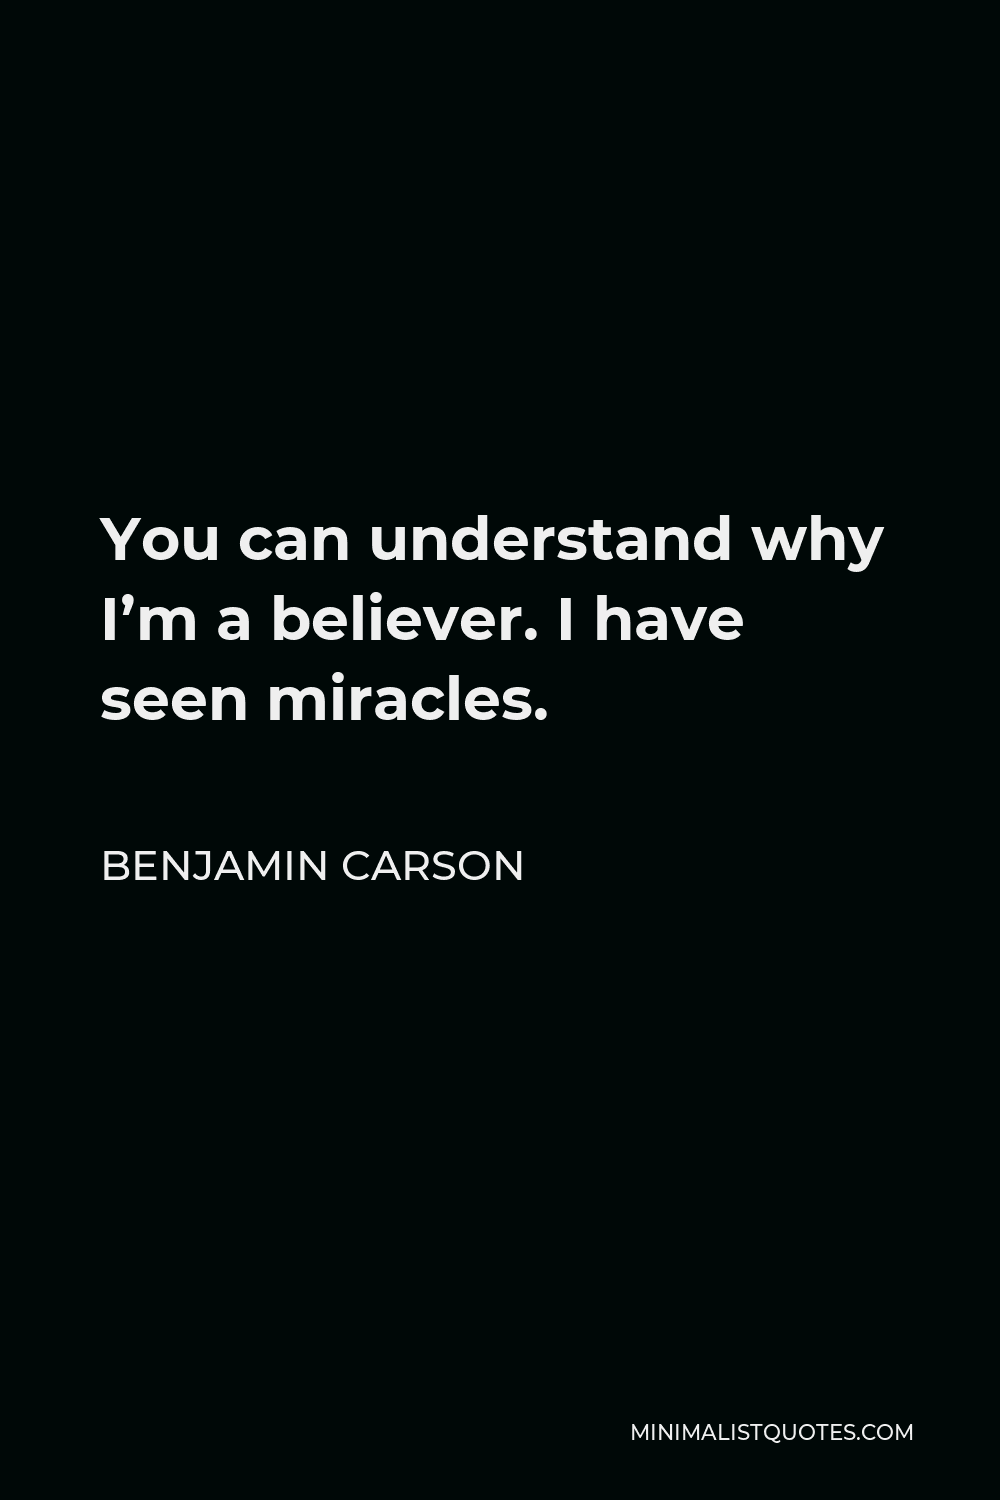 Benjamin Carson Quote - You can understand why I’m a believer. I have seen miracles.